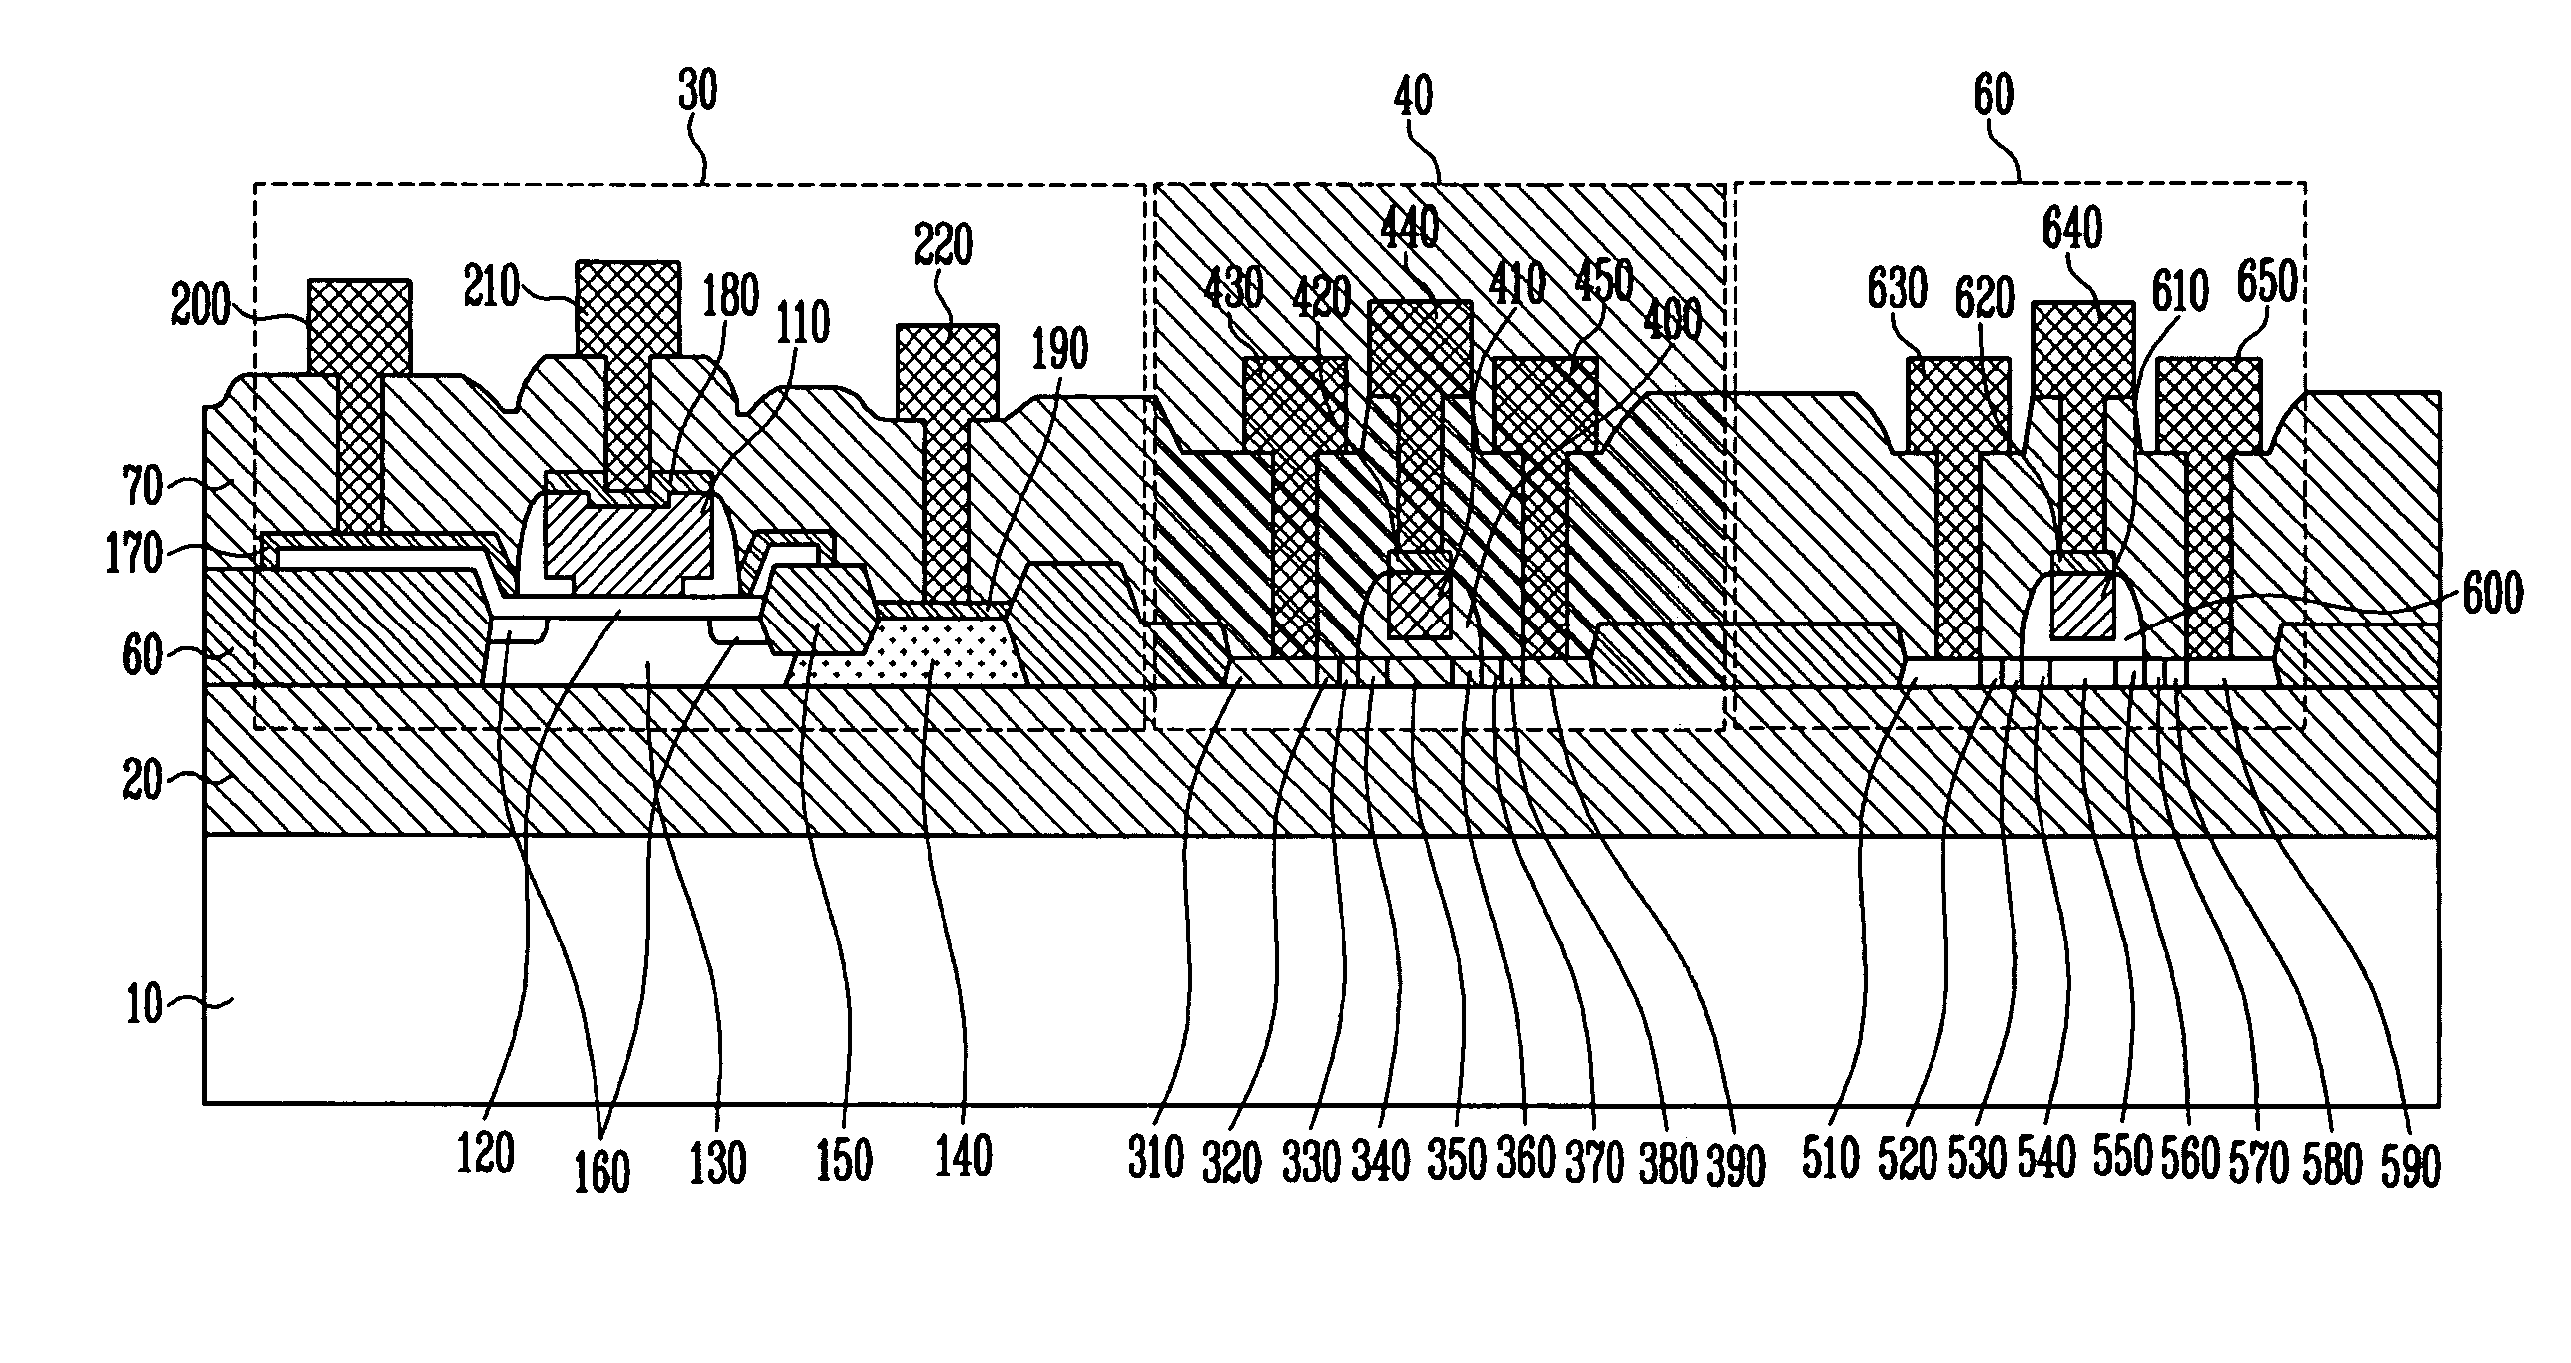 NMOS device, PMOS device, and SiGe HBT device formed on SOI substrate and method of fabricating the same